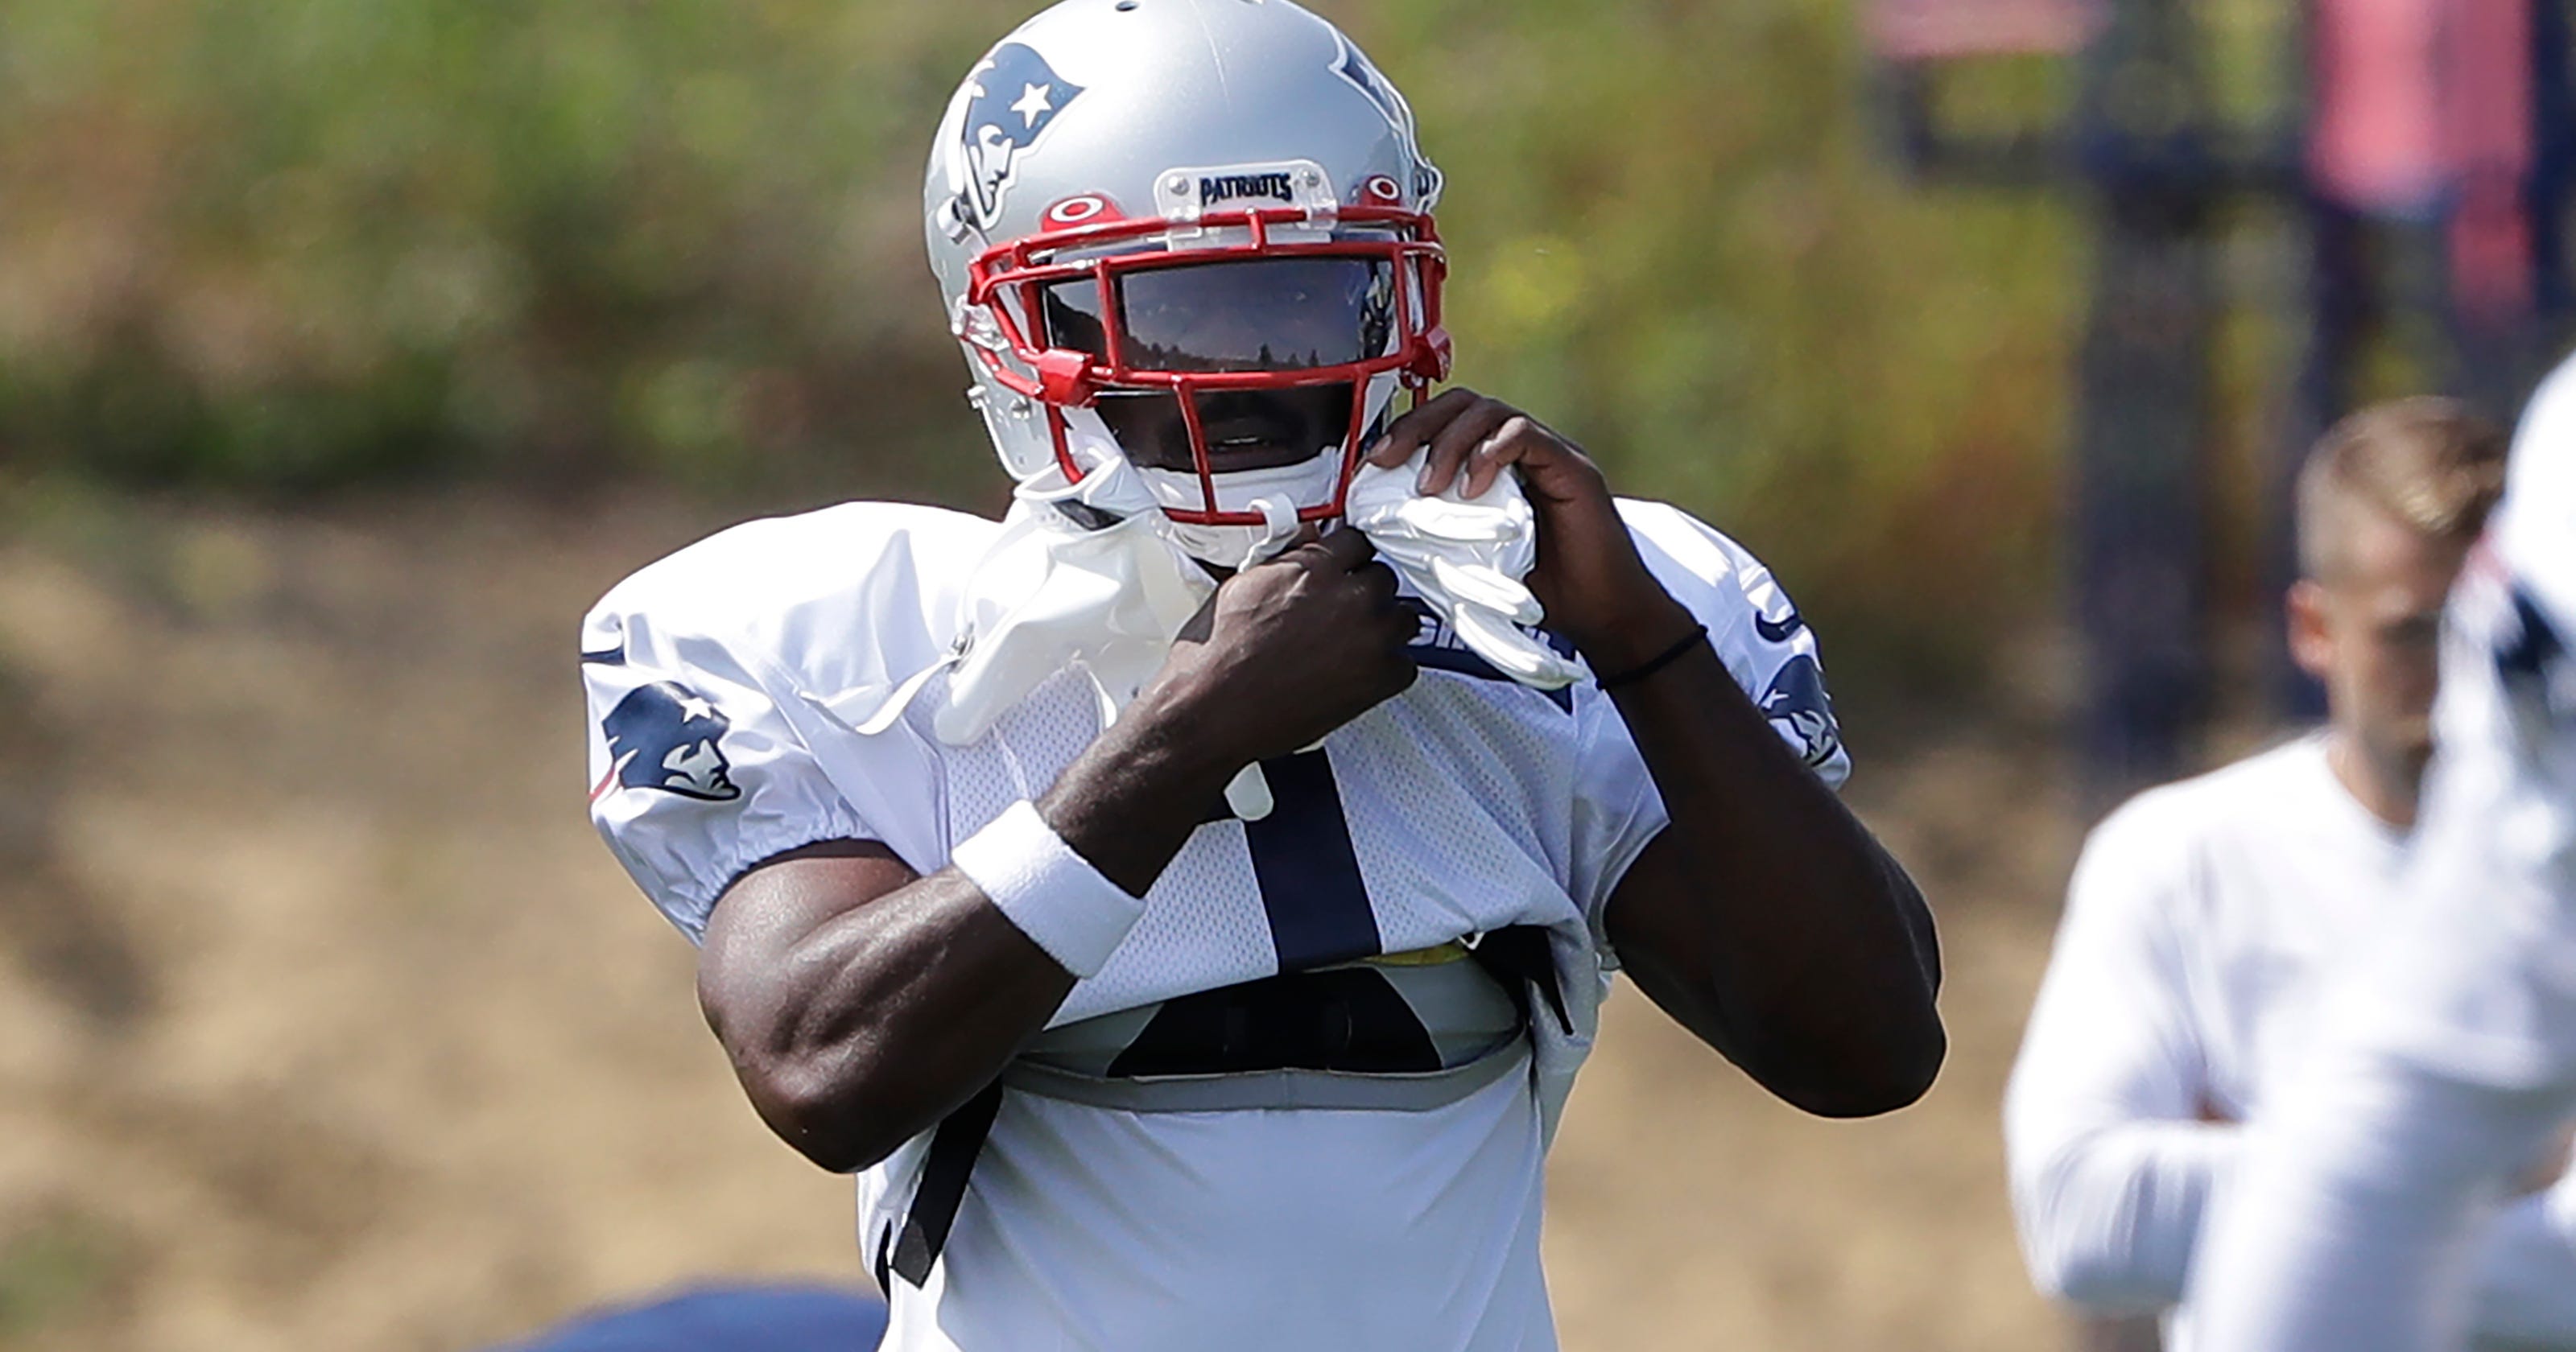 Antonio Brown: Patriots WR talks about haters in social media post3200 x 1680